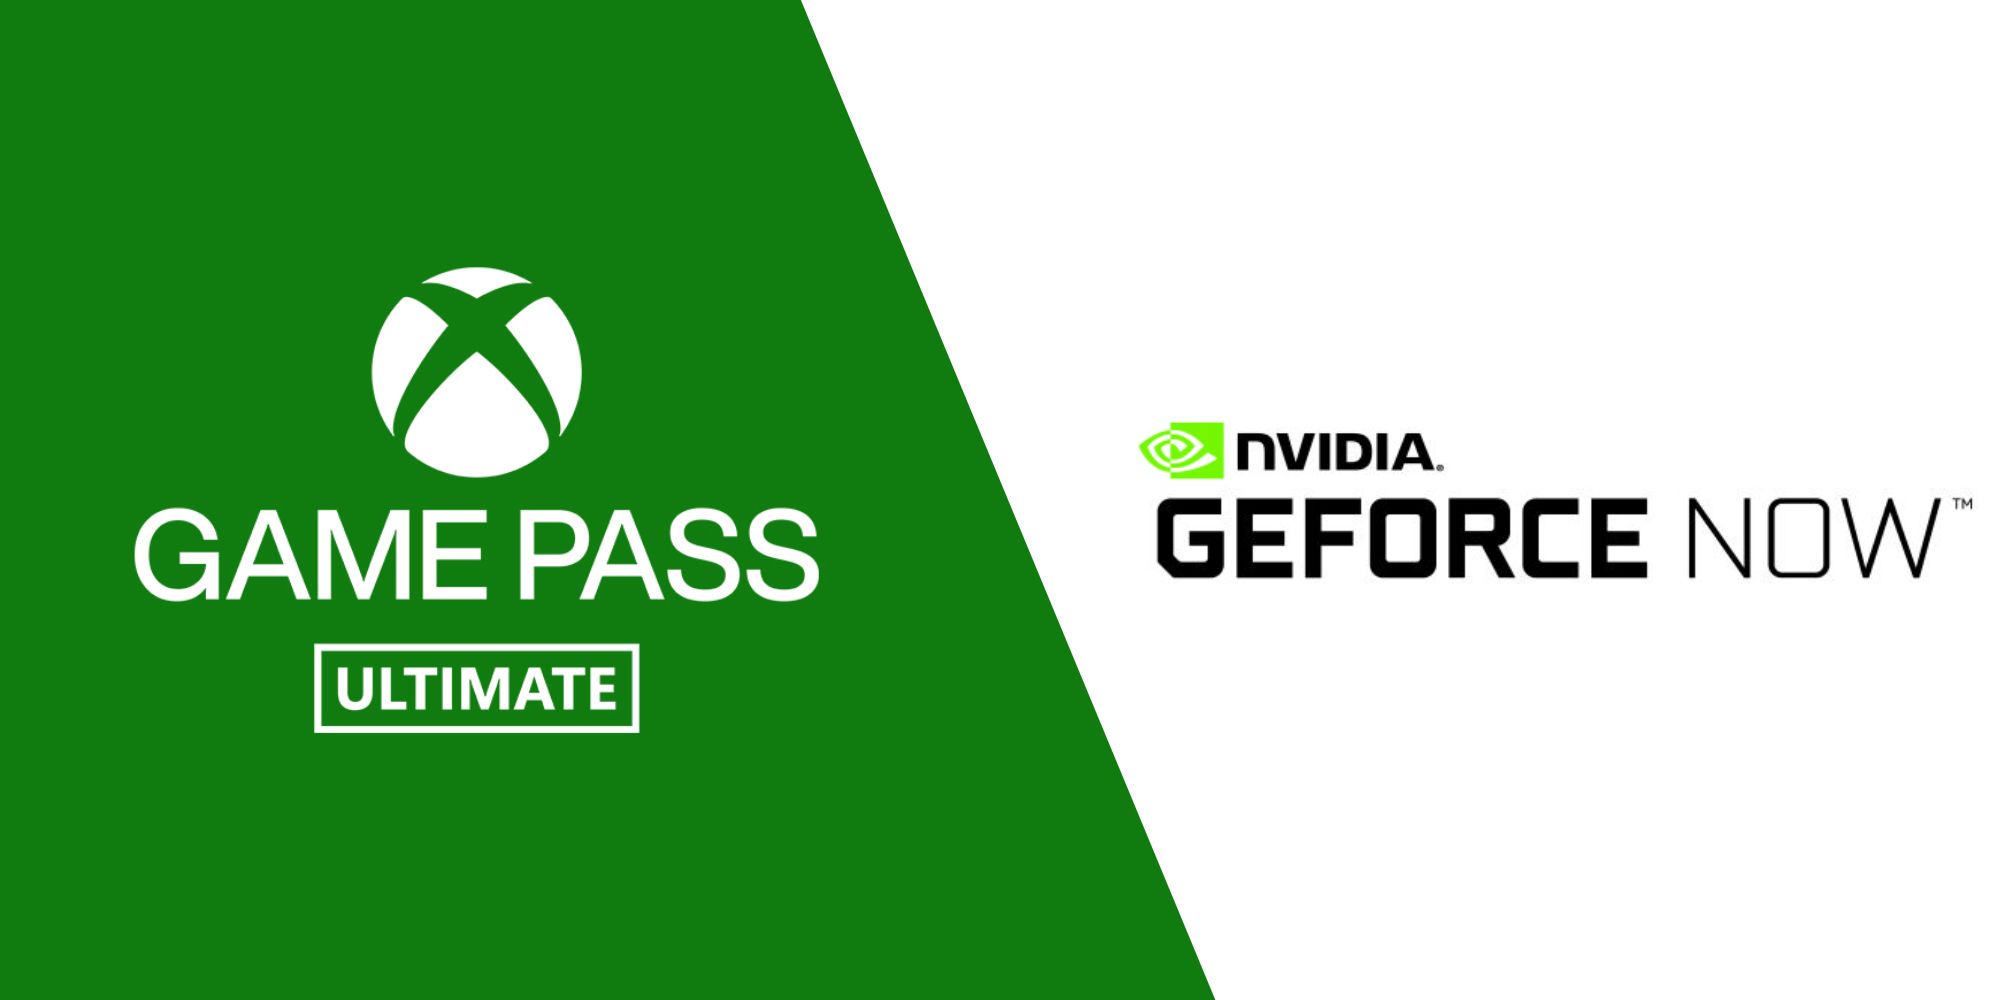 Game Pass VS Geforce Now streaming